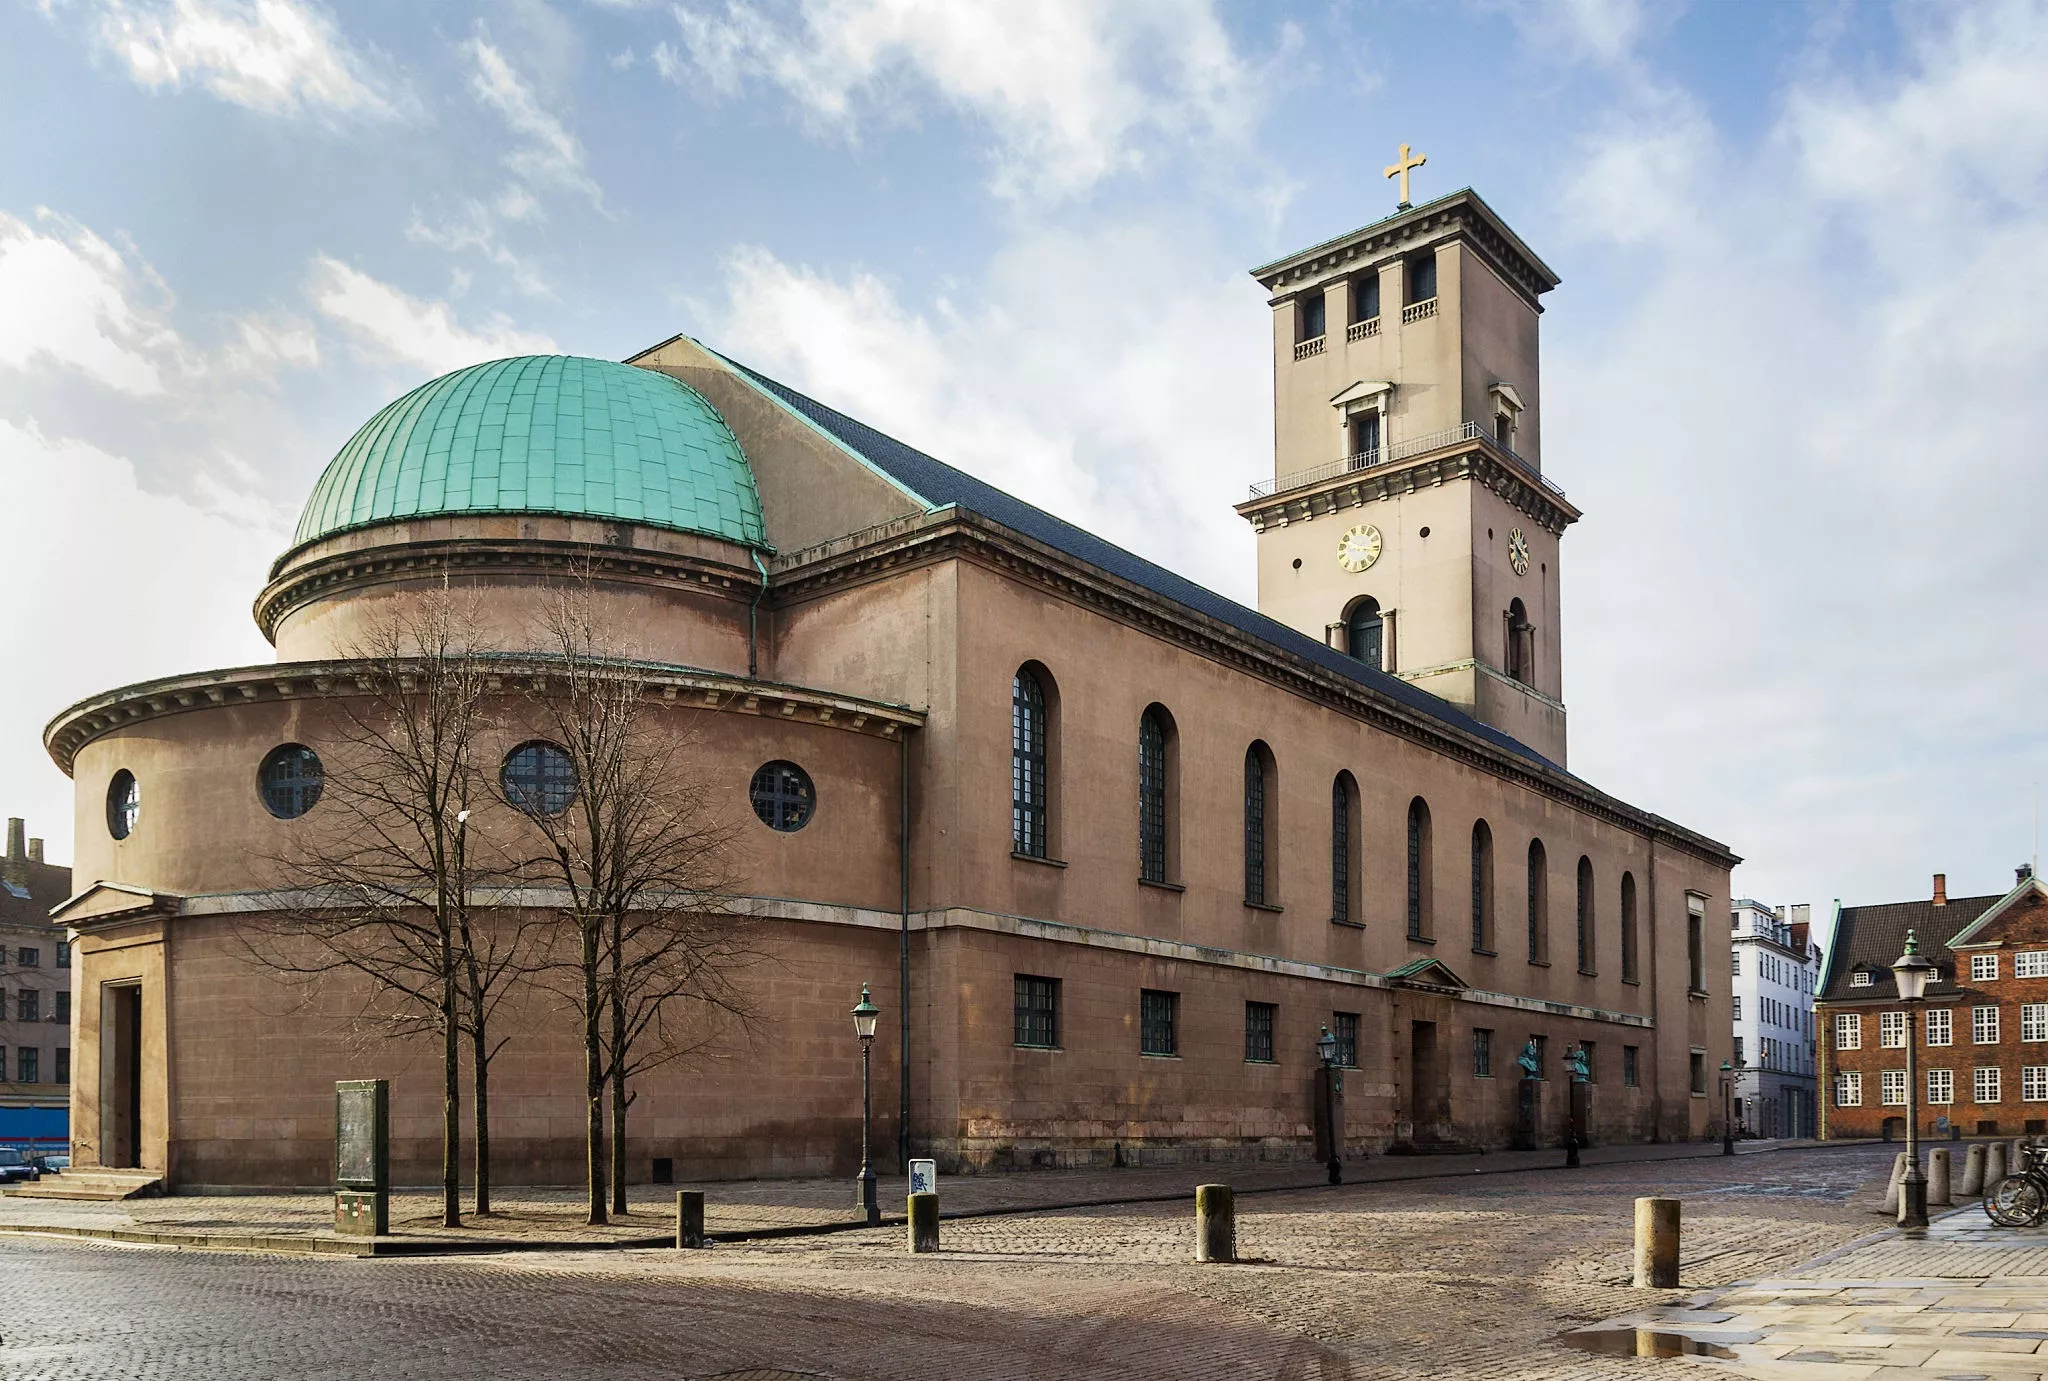 Church of Our Lady in Denmark, Europe | Architecture - Rated 3.6